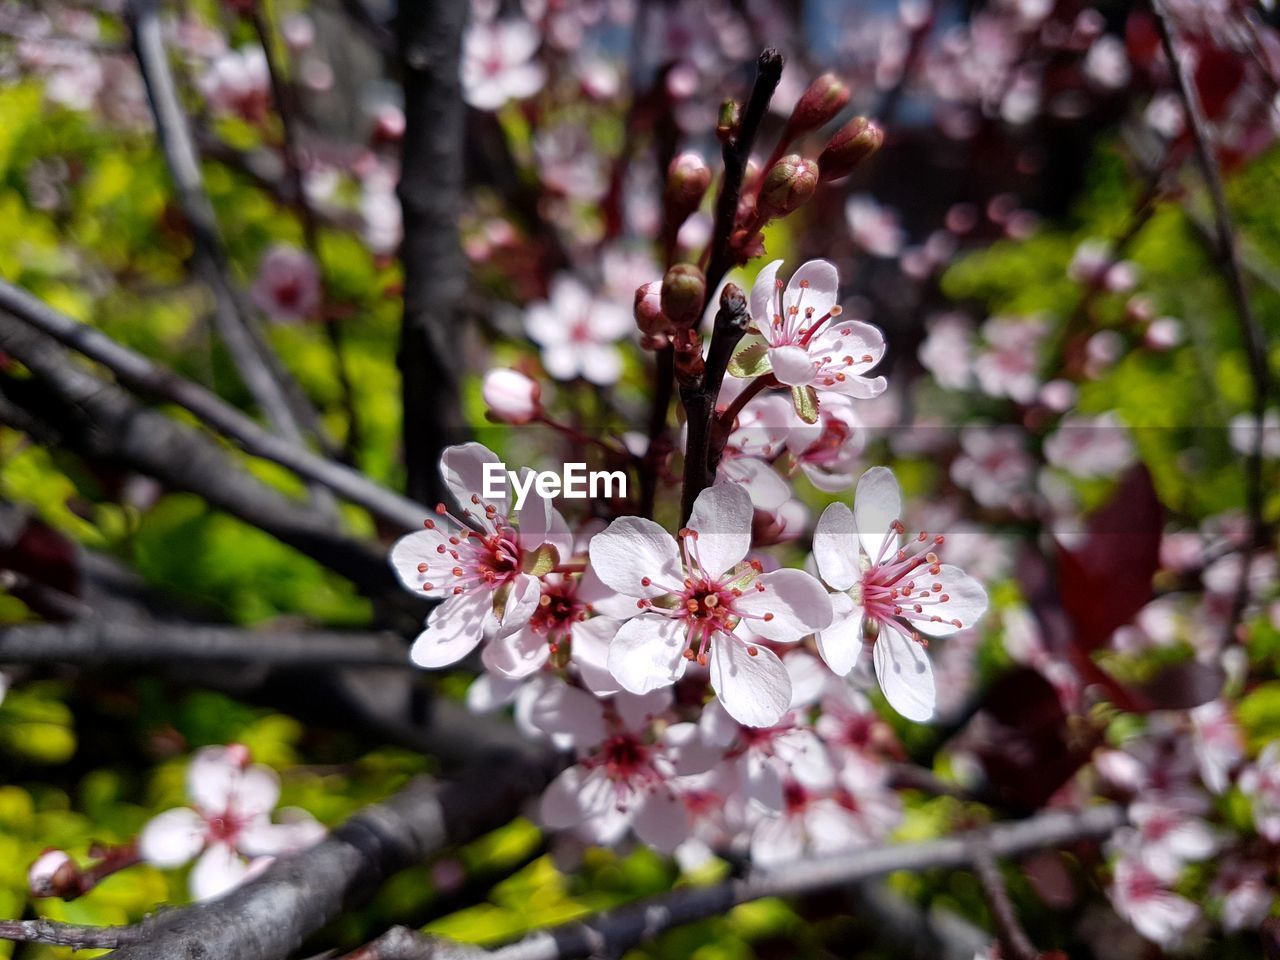 CLOSE-UP OF CHERRY BLOSSOMS ON TWIG